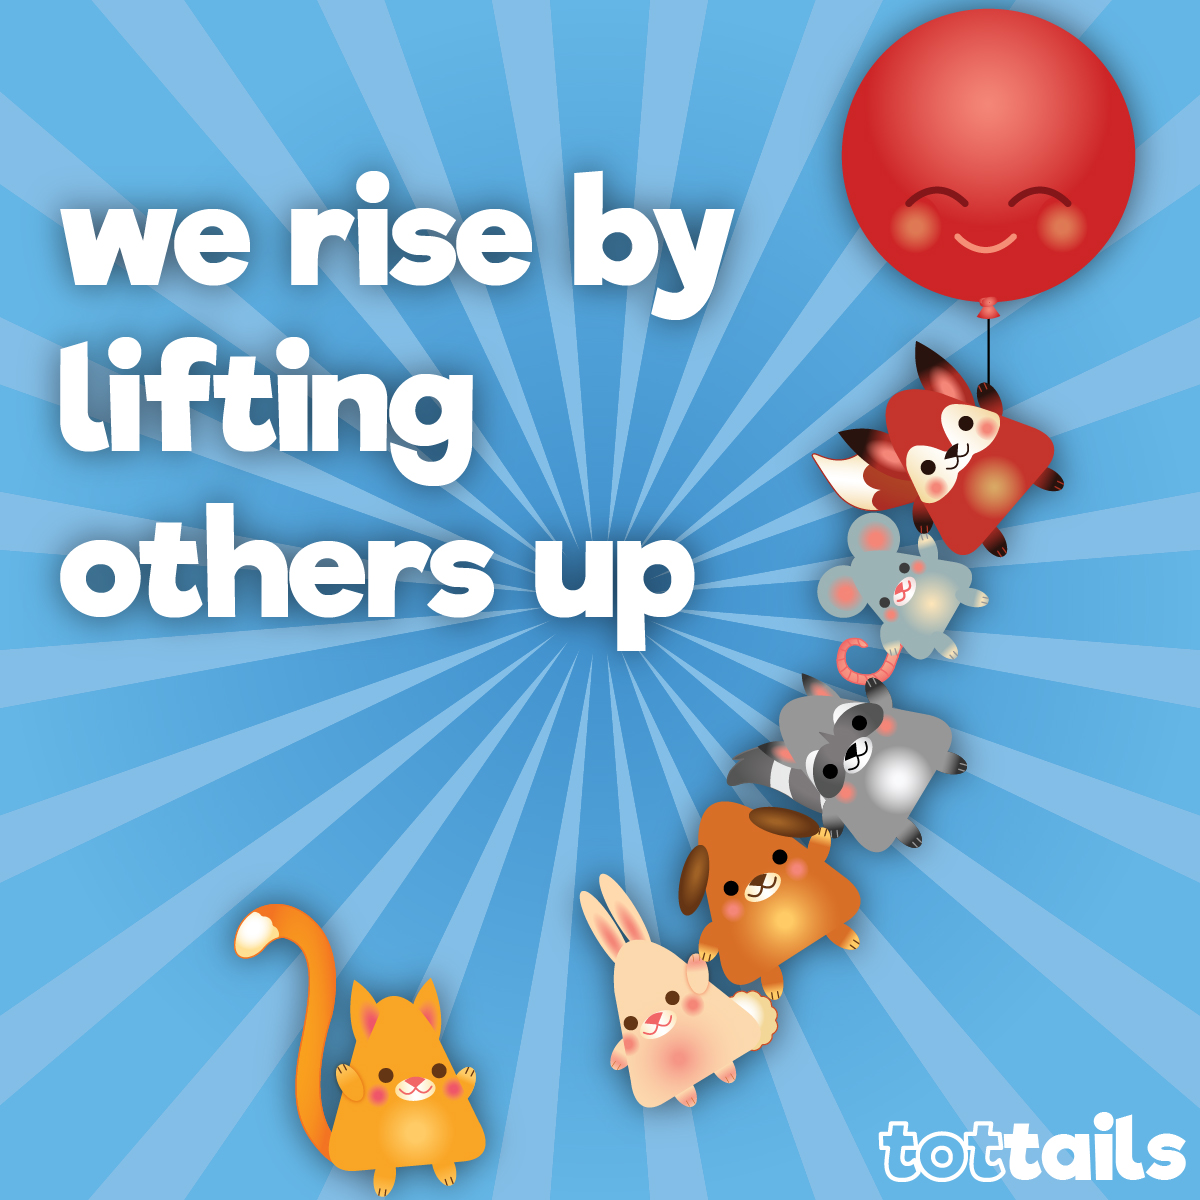 Positivity for kids - we rise by lifting others up